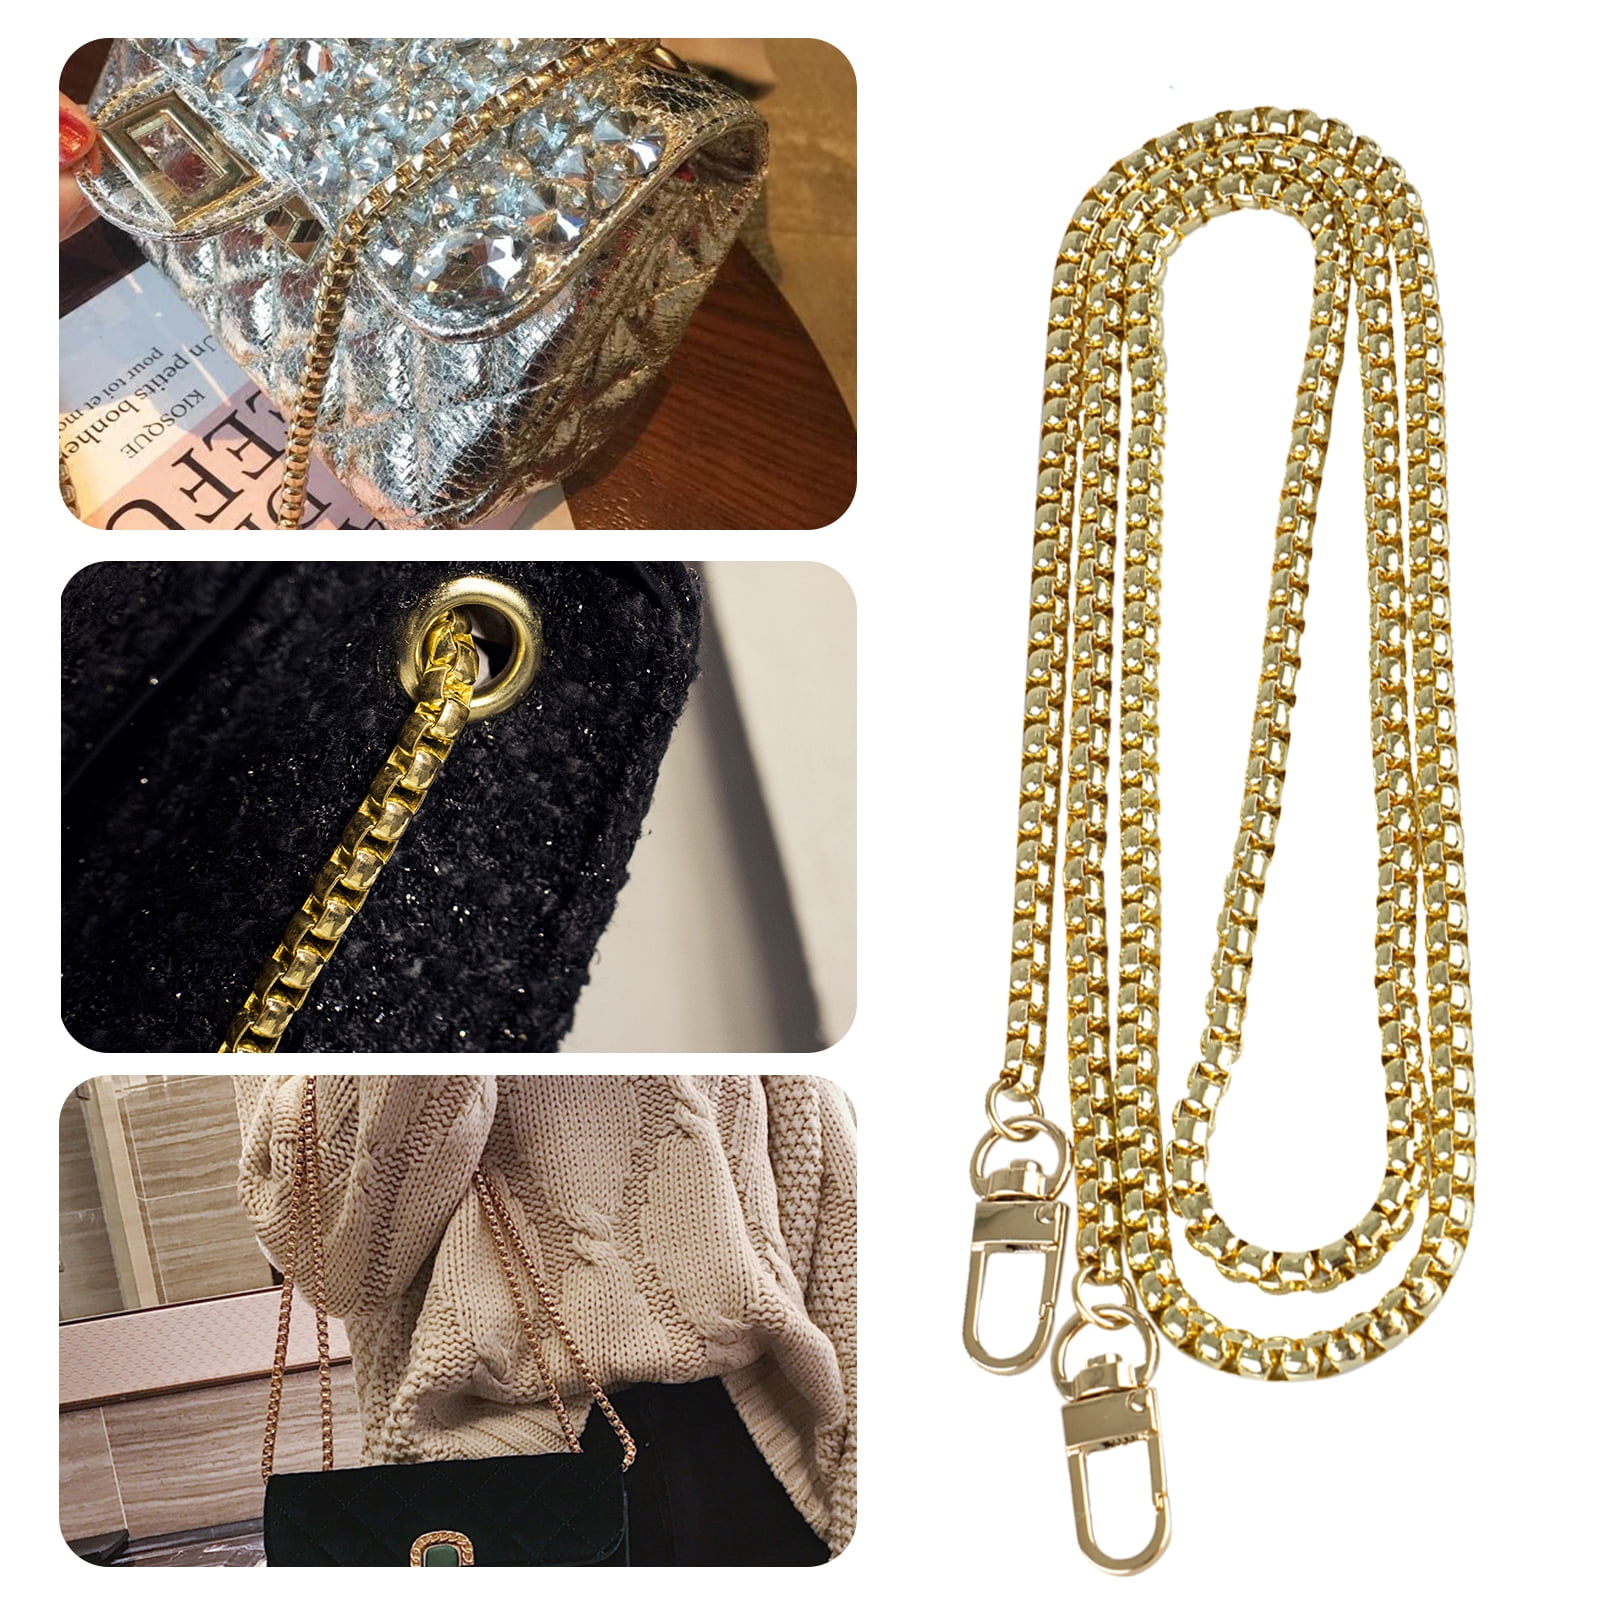 JLFCH DIY Iron Flat Chain Strap Handbag Chains Accessories Purse Straps Shoulder CrossBody Replacement with Metal Buckle 